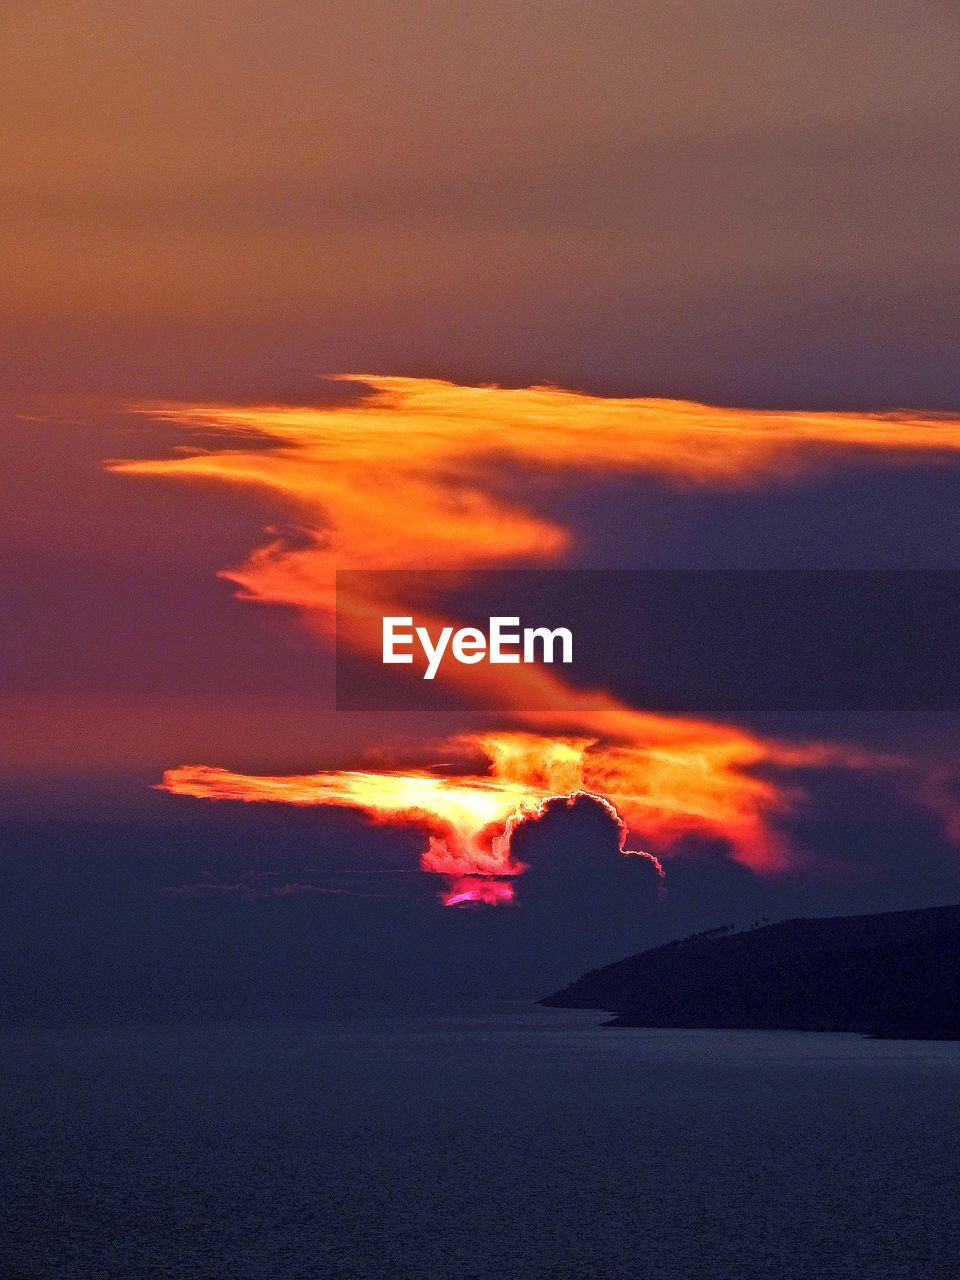 SCENIC VIEW OF SEA AND SILHOUETTE MOUNTAIN AGAINST ORANGE SKY